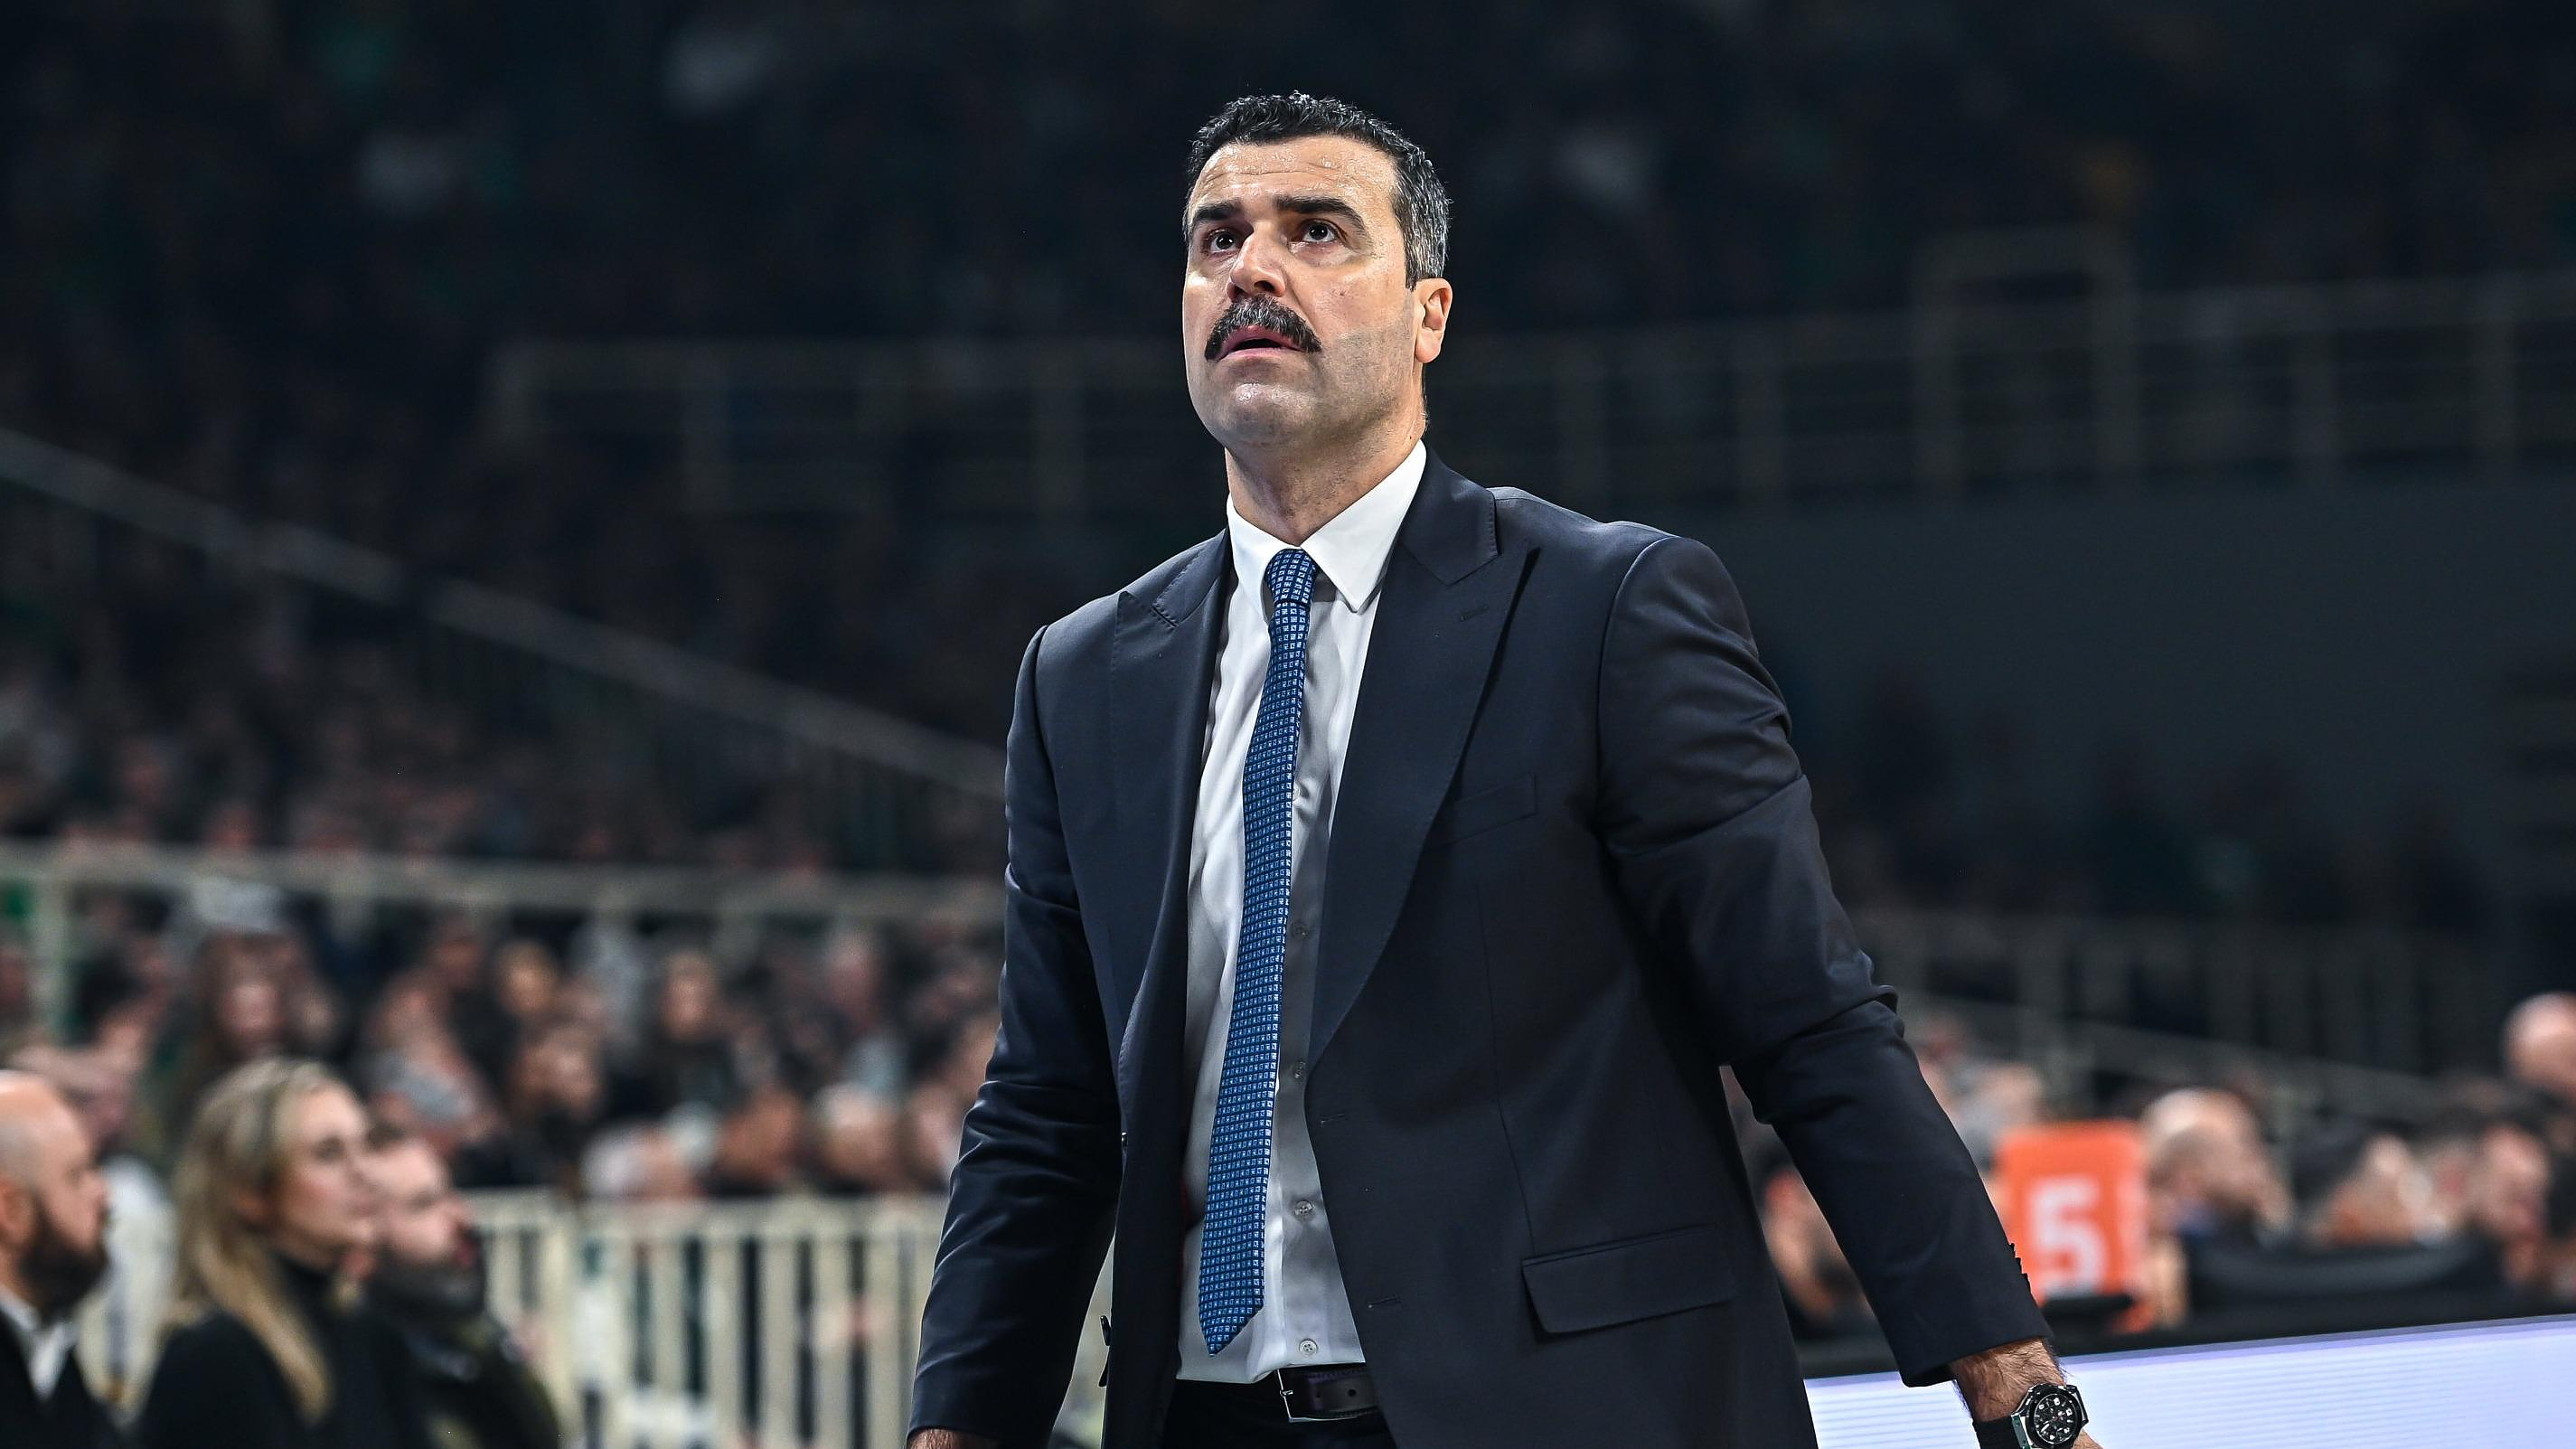 Basketball: Anadolu Efes Istanbul dismisses its coach after a 26-point defeat